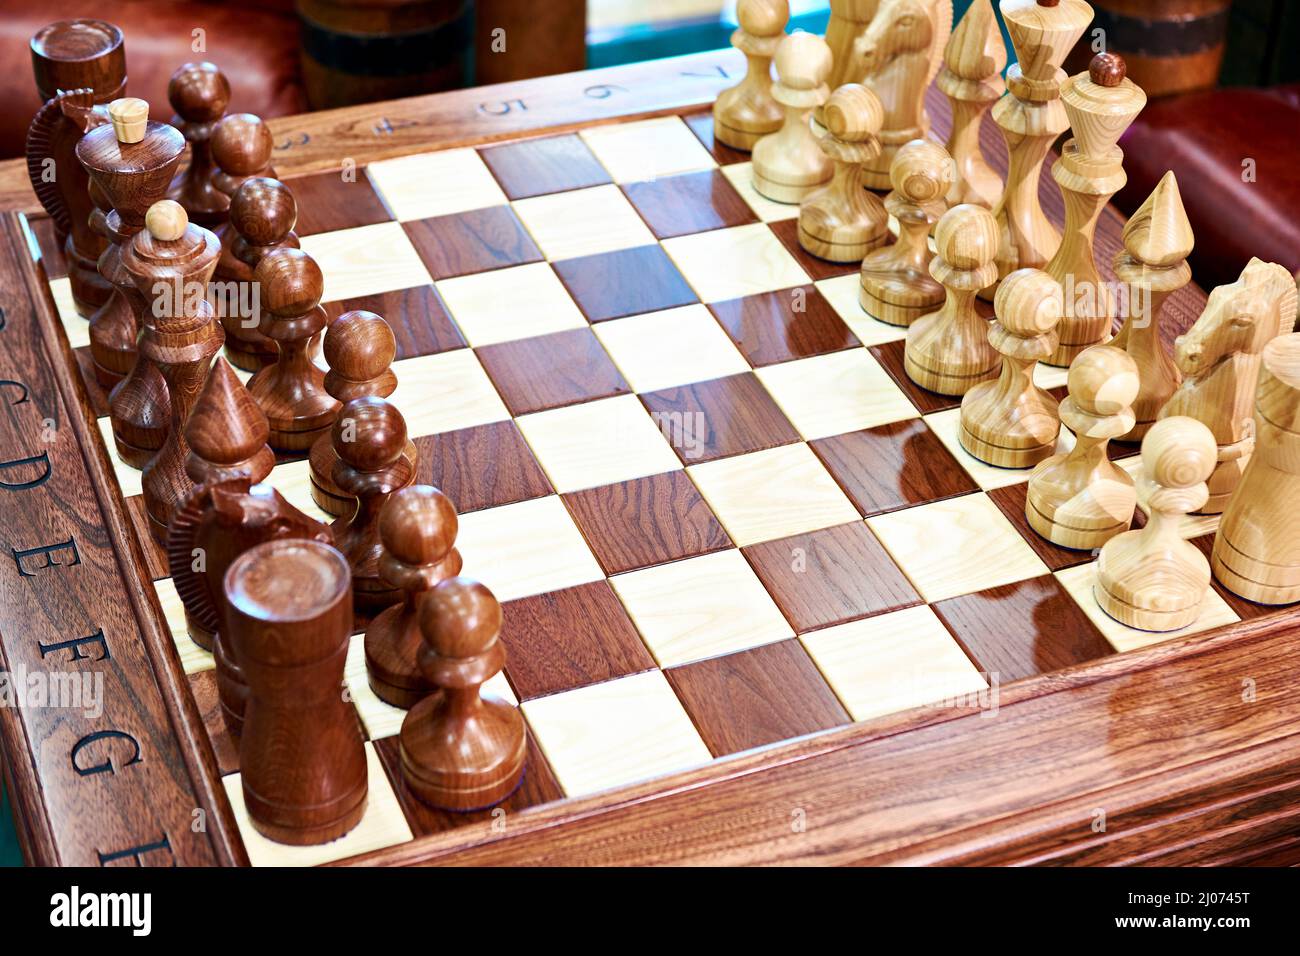 Chess on a vintage wooden table Stock Photo